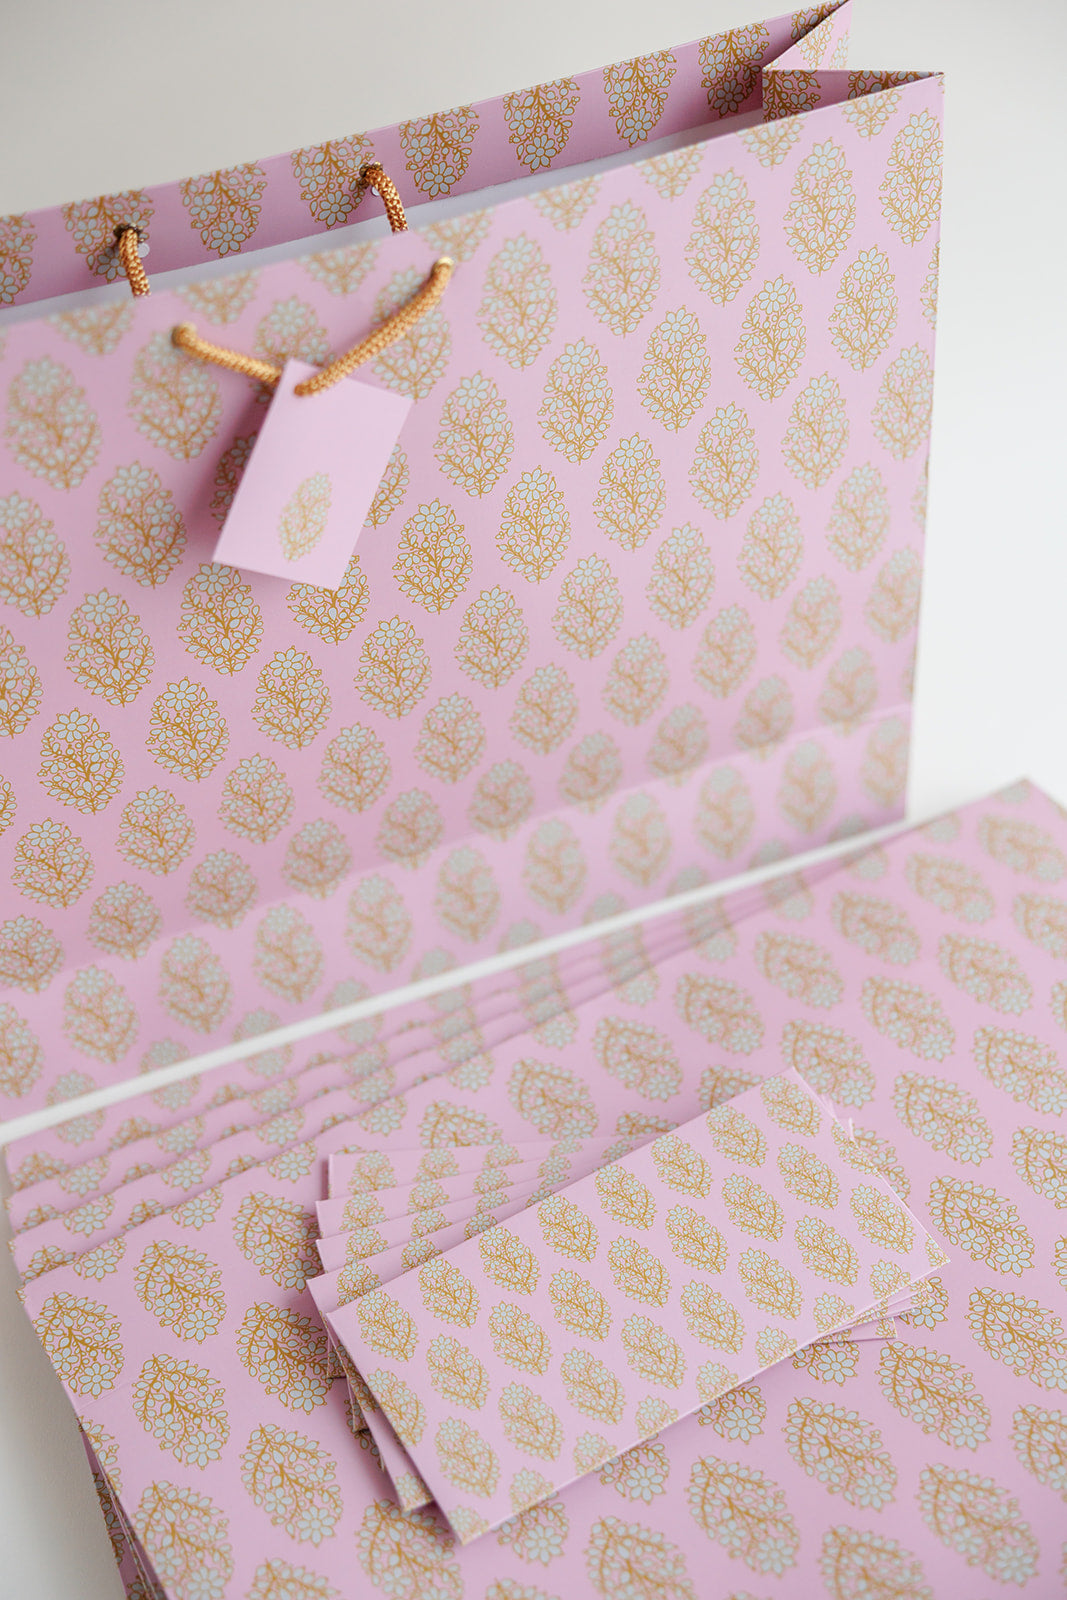 5 Leilani Lilac Gift Bags with Matching Gift Envelope